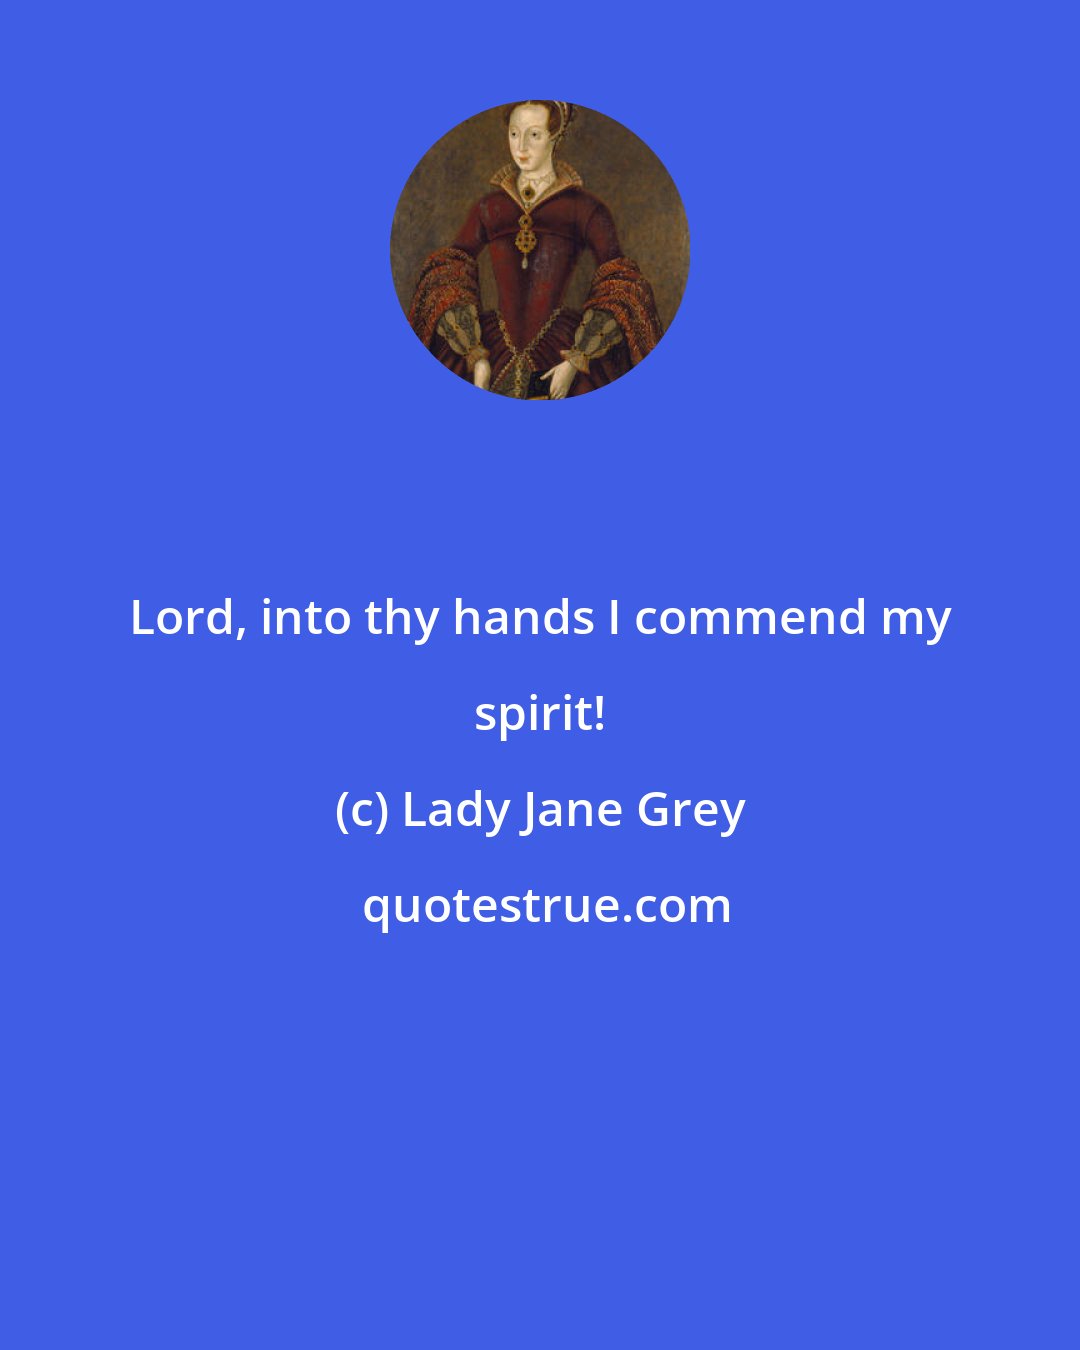 Lady Jane Grey: Lord, into thy hands I commend my spirit!